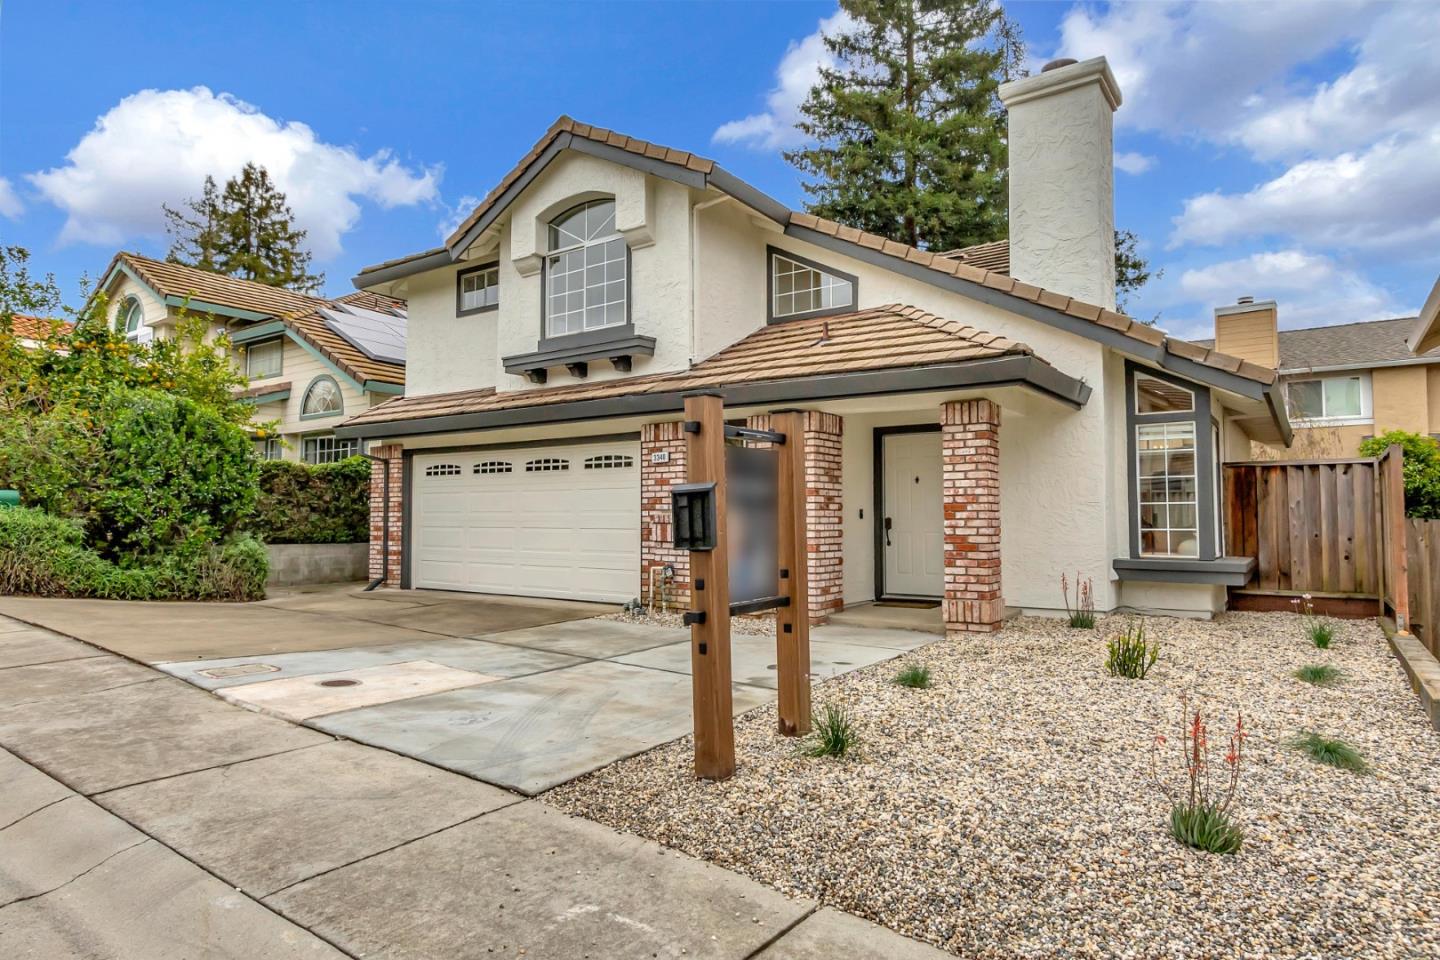 Photo of 3340 Country Leaf Ct in San Jose, CA